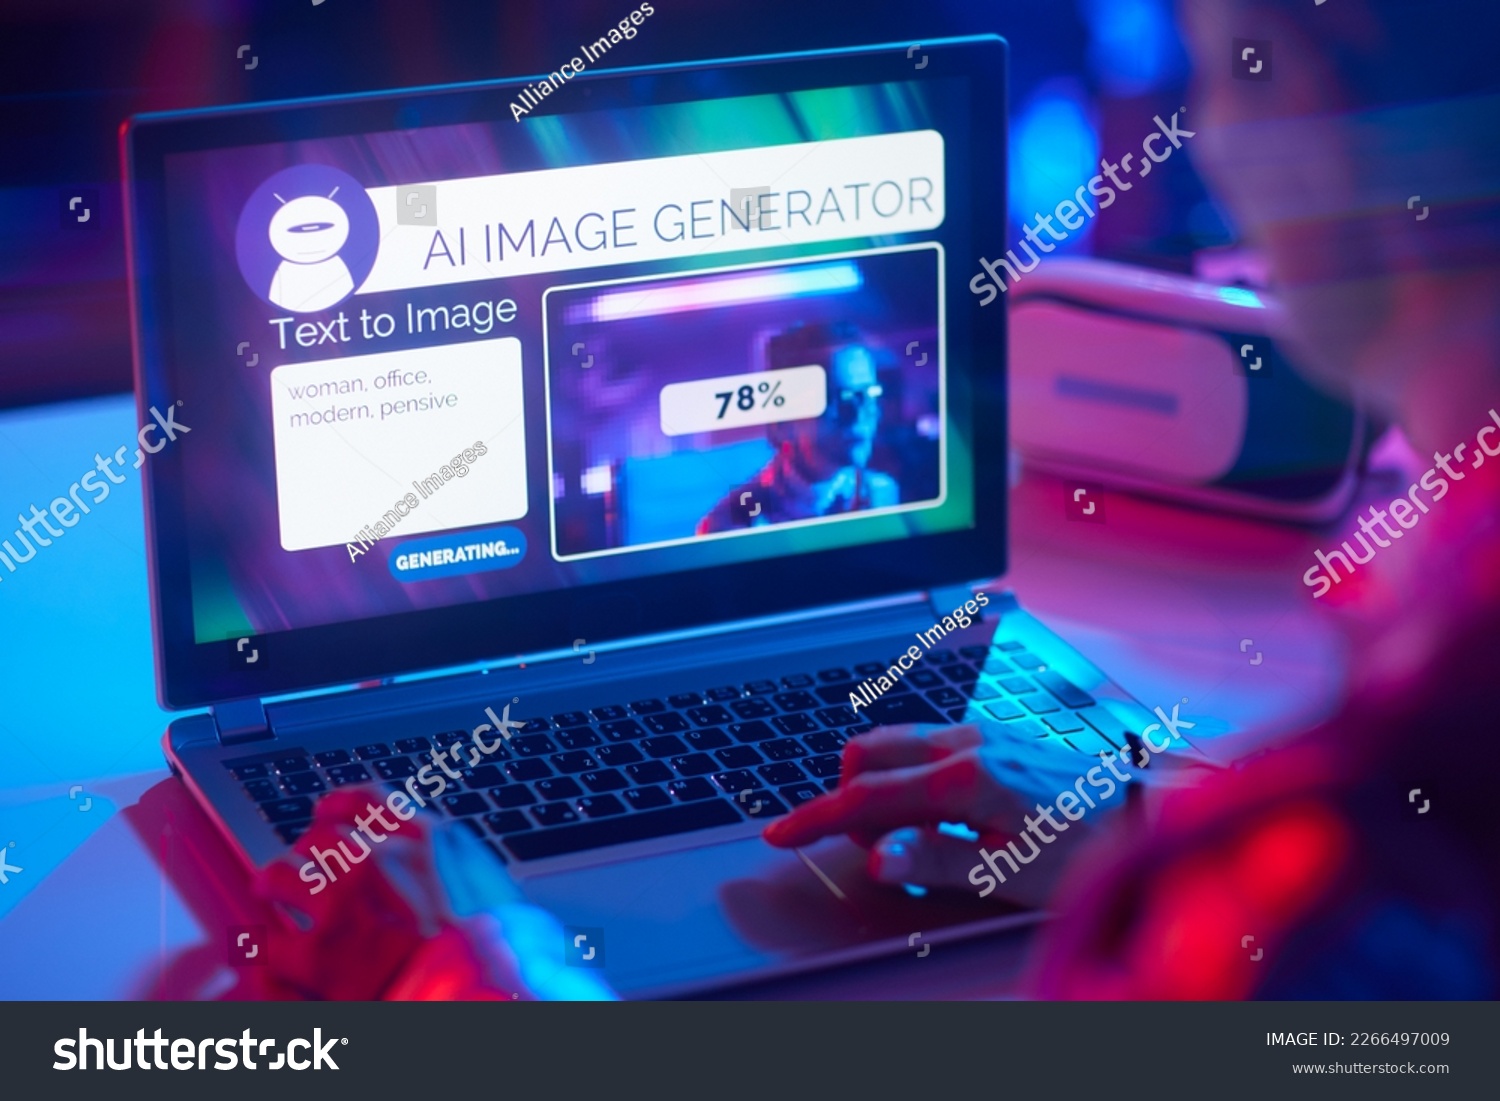 Seen from behind modern business woman with laptop using text to image artificial intelligence image generator. #2266497009